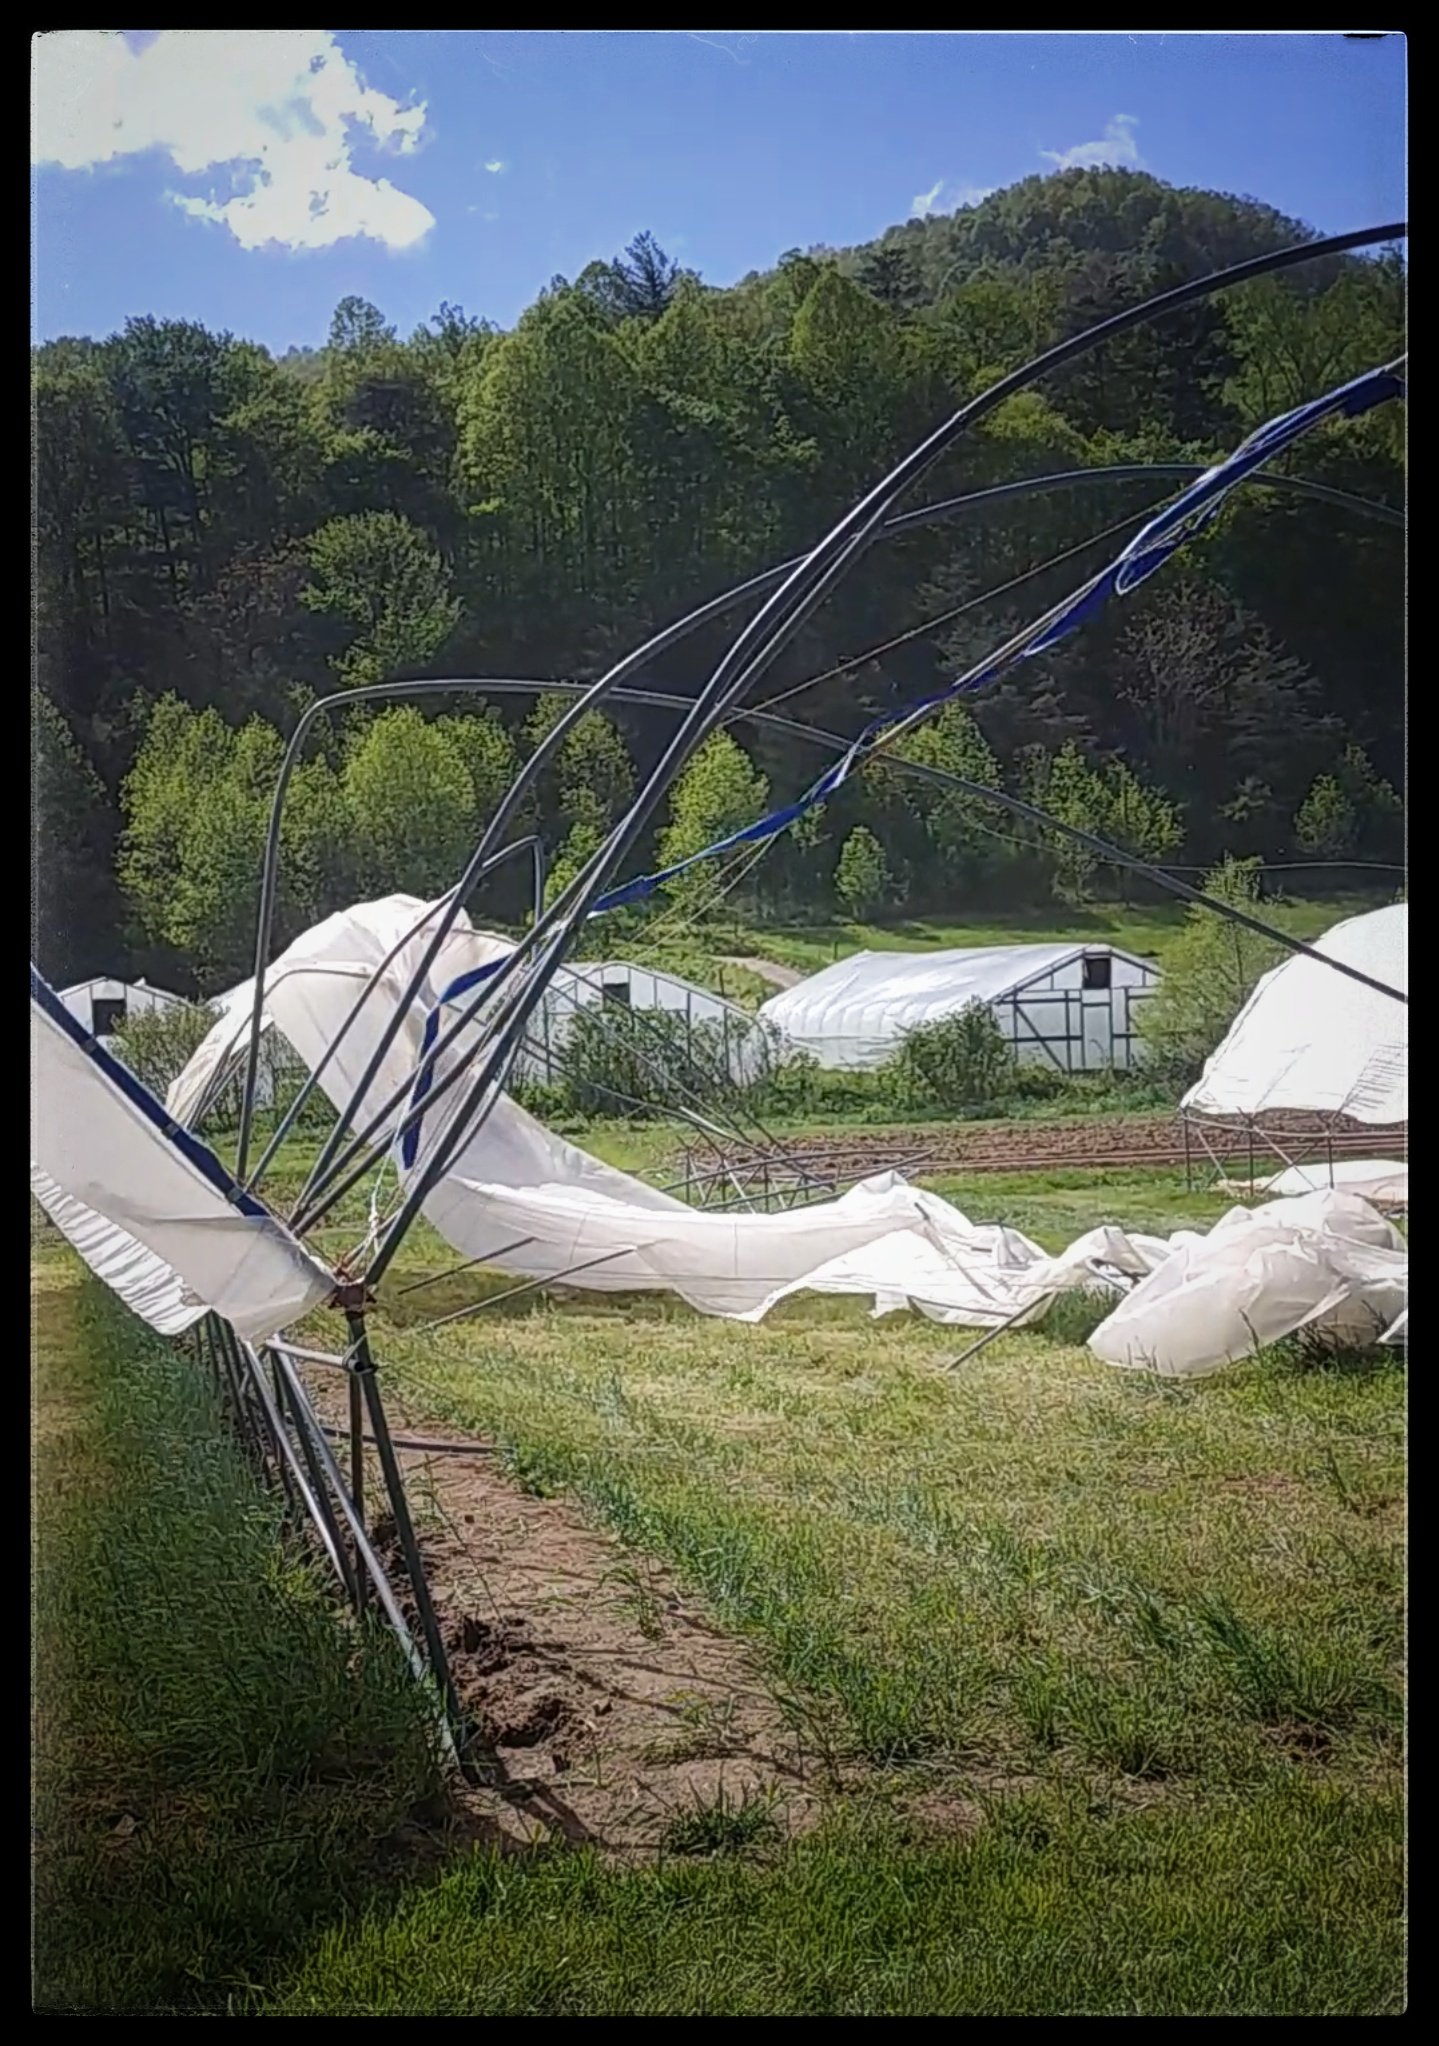 Previous Happening: Farm Happenings for May 7, 2019